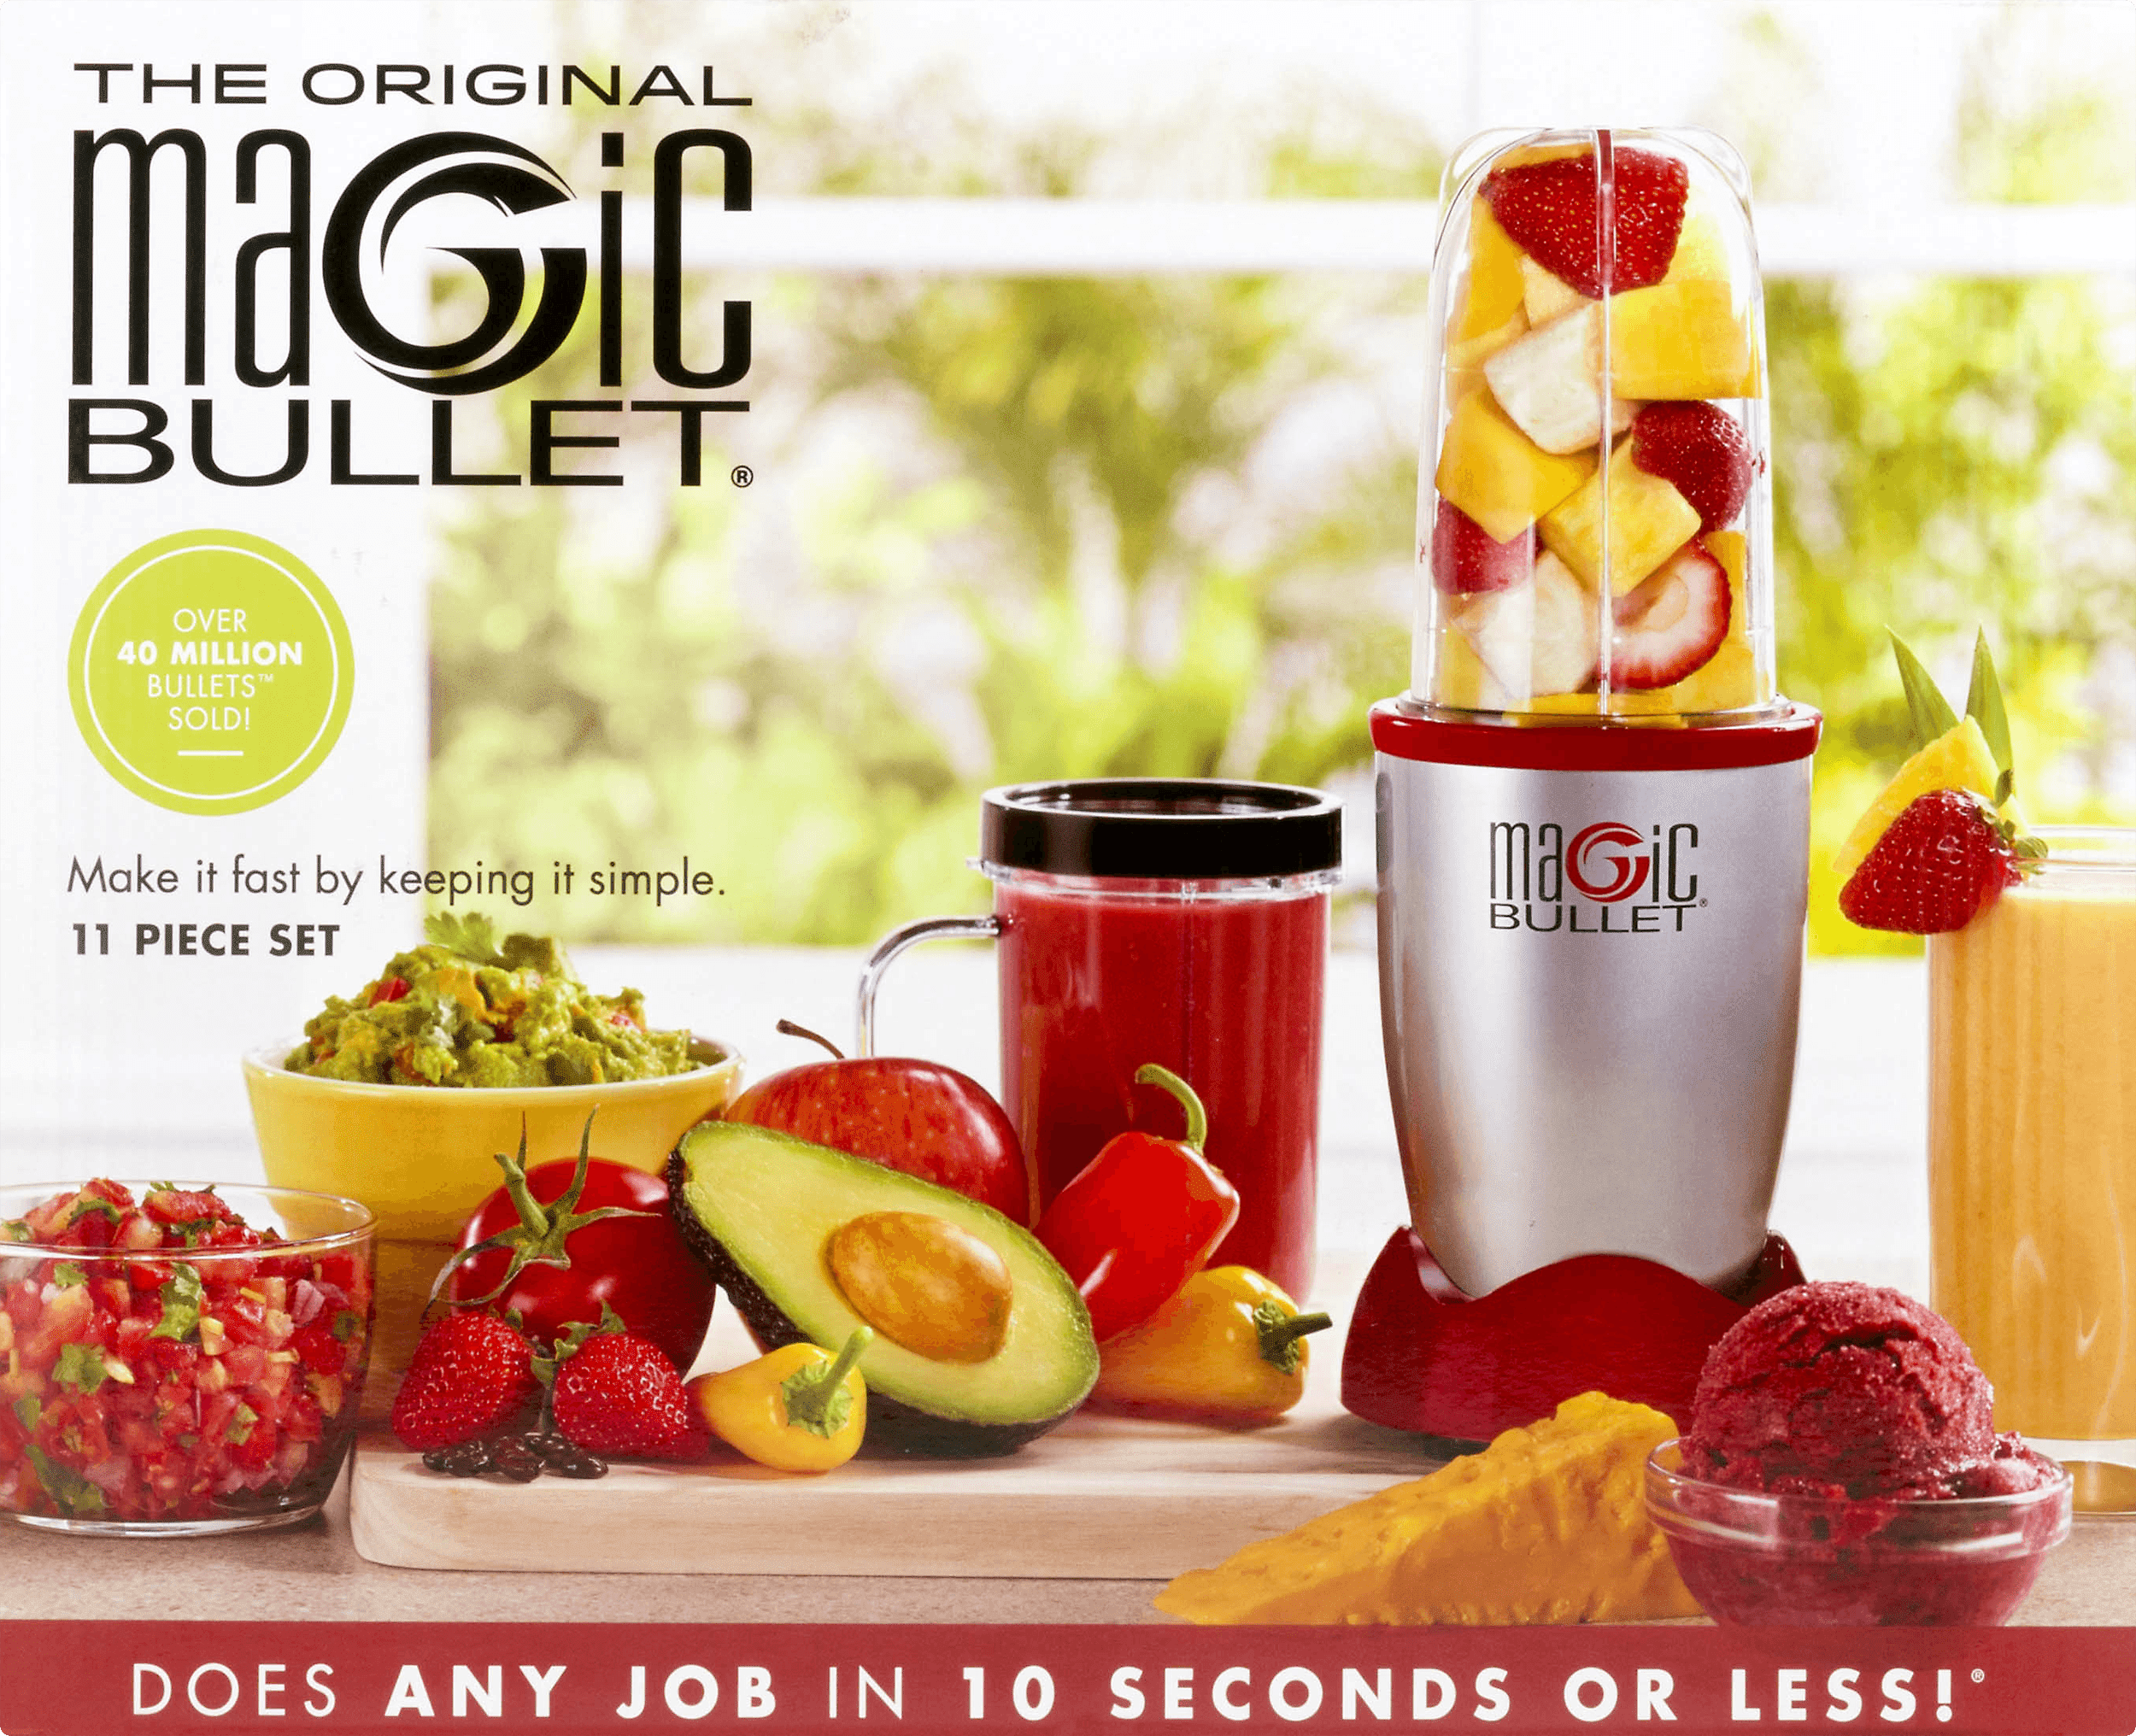 Mix up some protein in the 11-piece Magic Bullet with 3 on-the-go